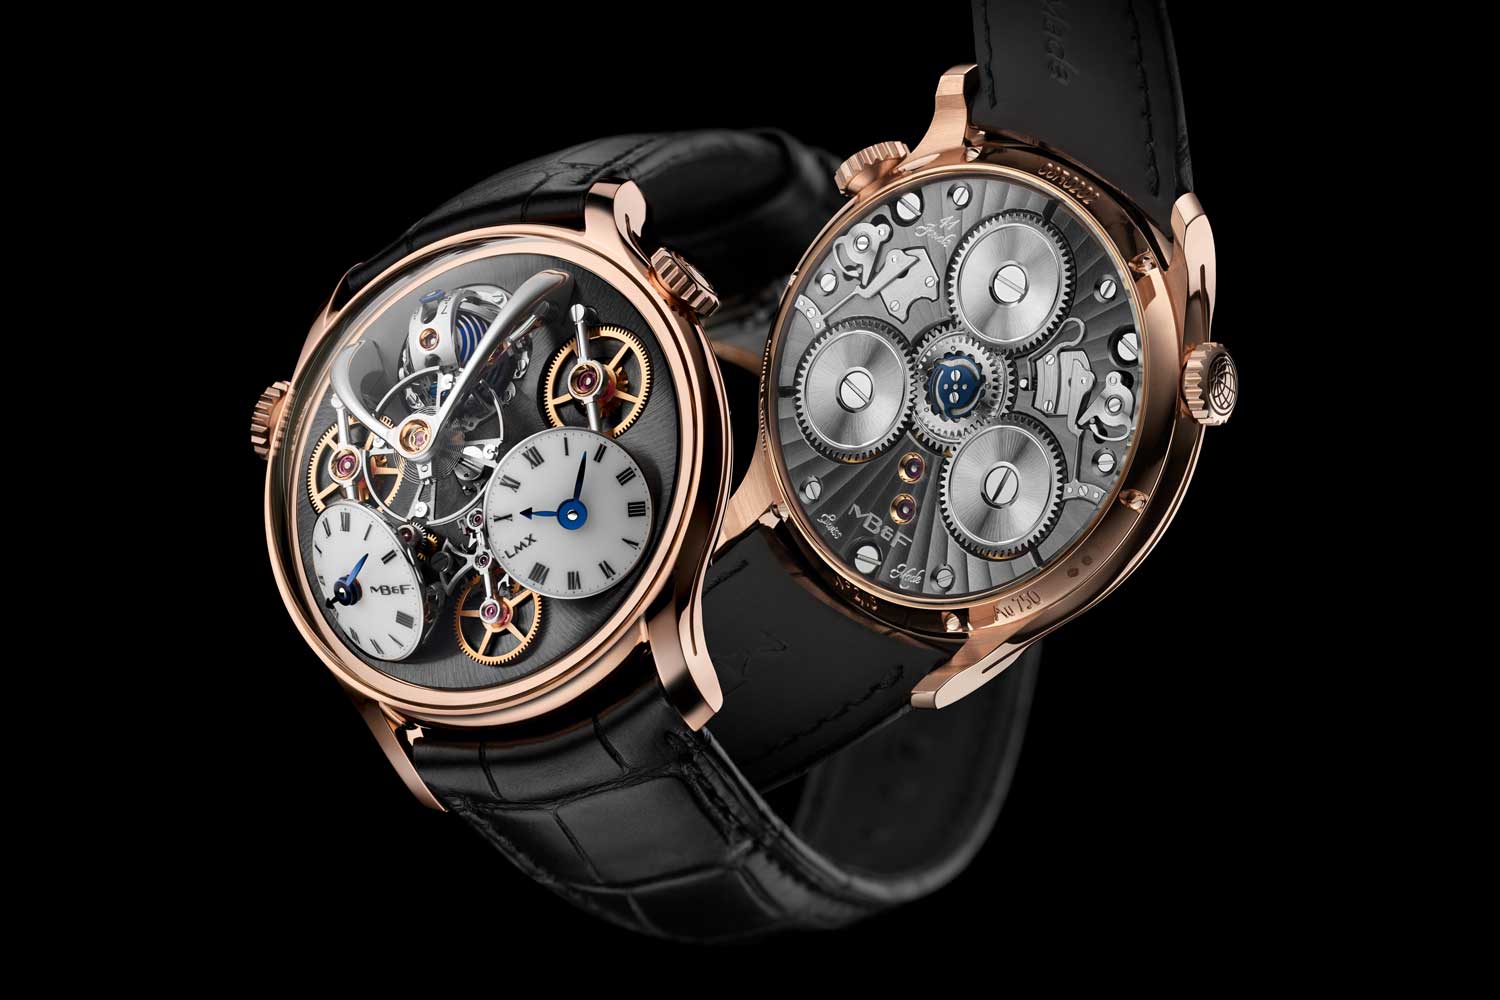 The MB&F LMX in 18k 5N+ red gold with black NAC treatment on plates and bridges